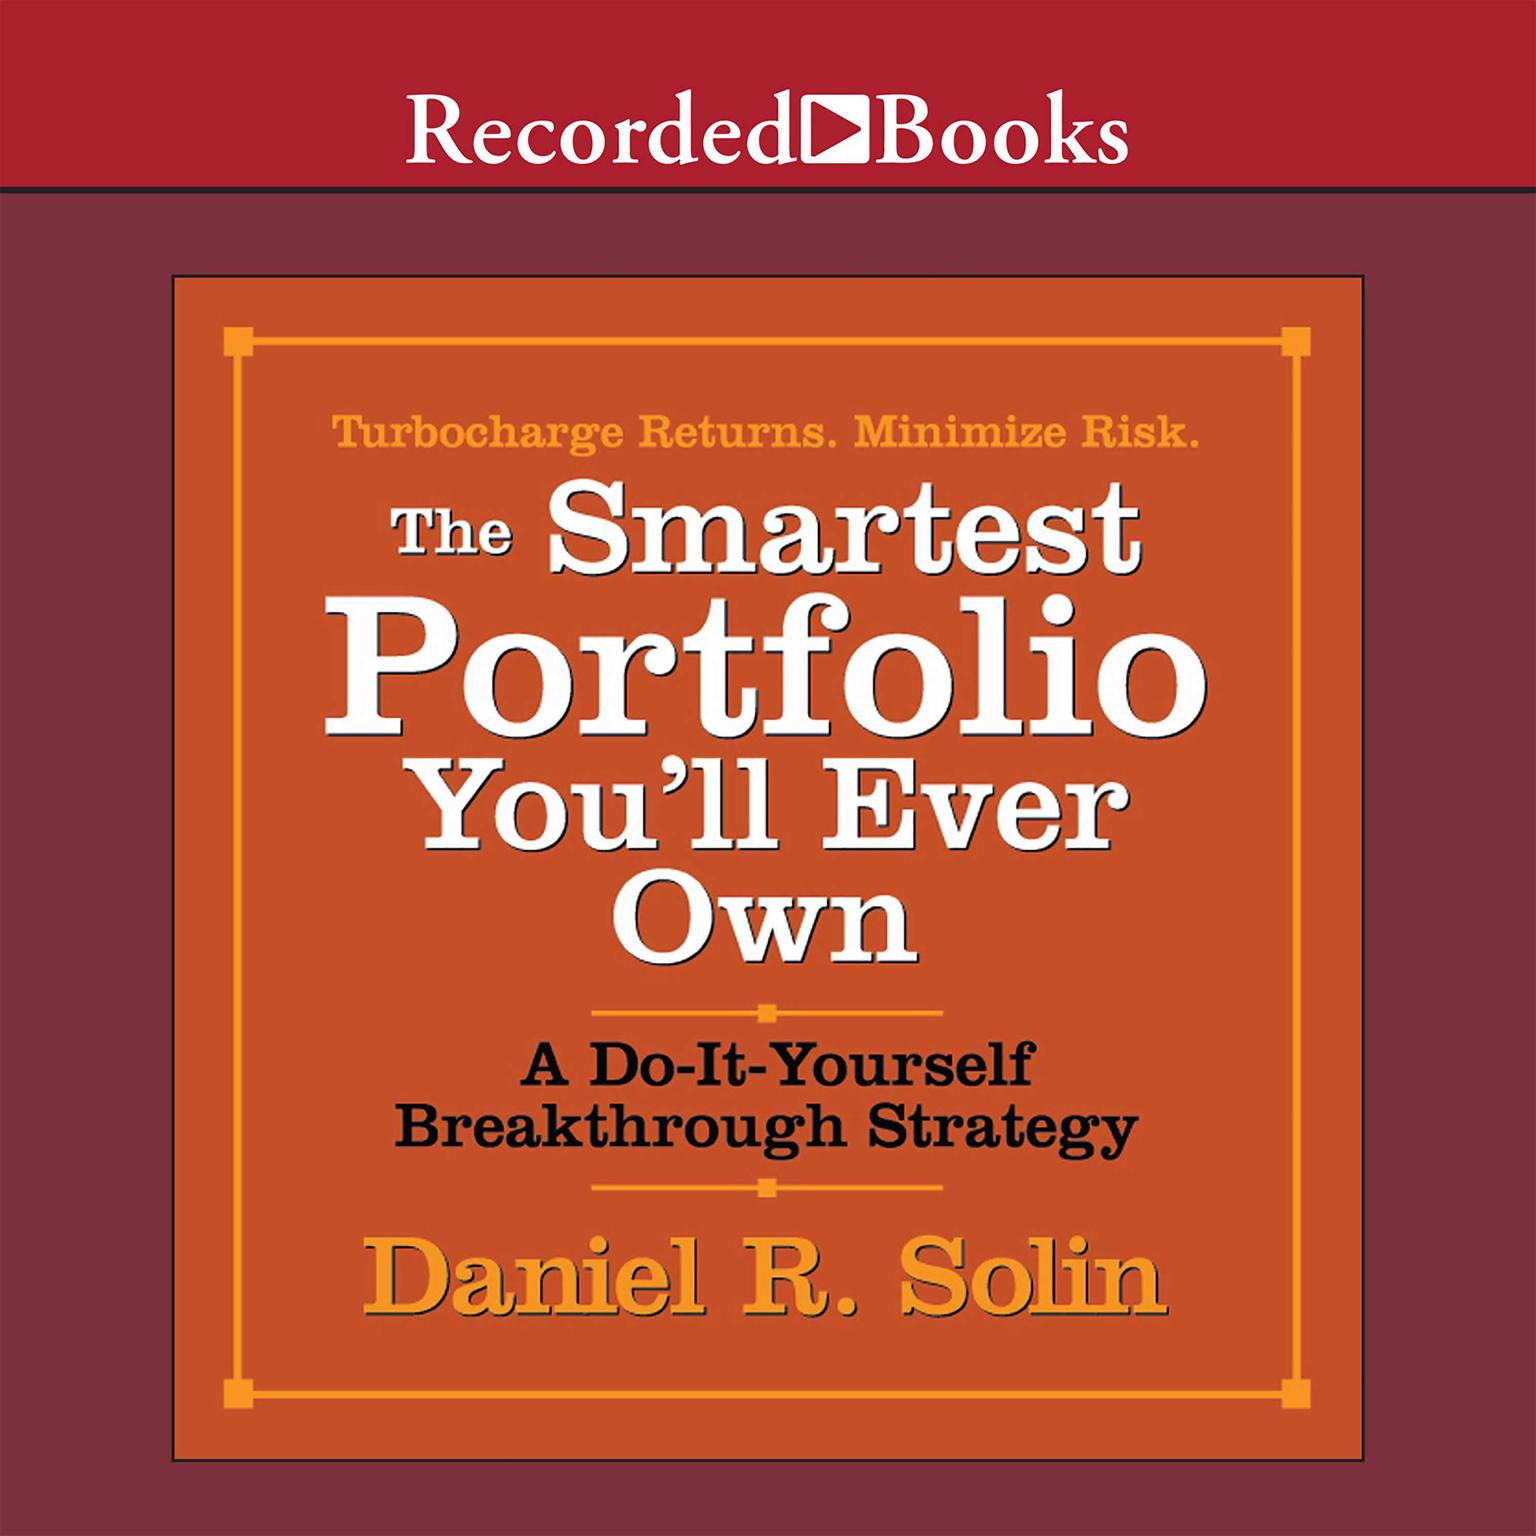 The Smartest Portfolio Youll Ever Own: A Do-It-Yourself Breakthrough Strategy Audiobook, by Daniel R. Solin